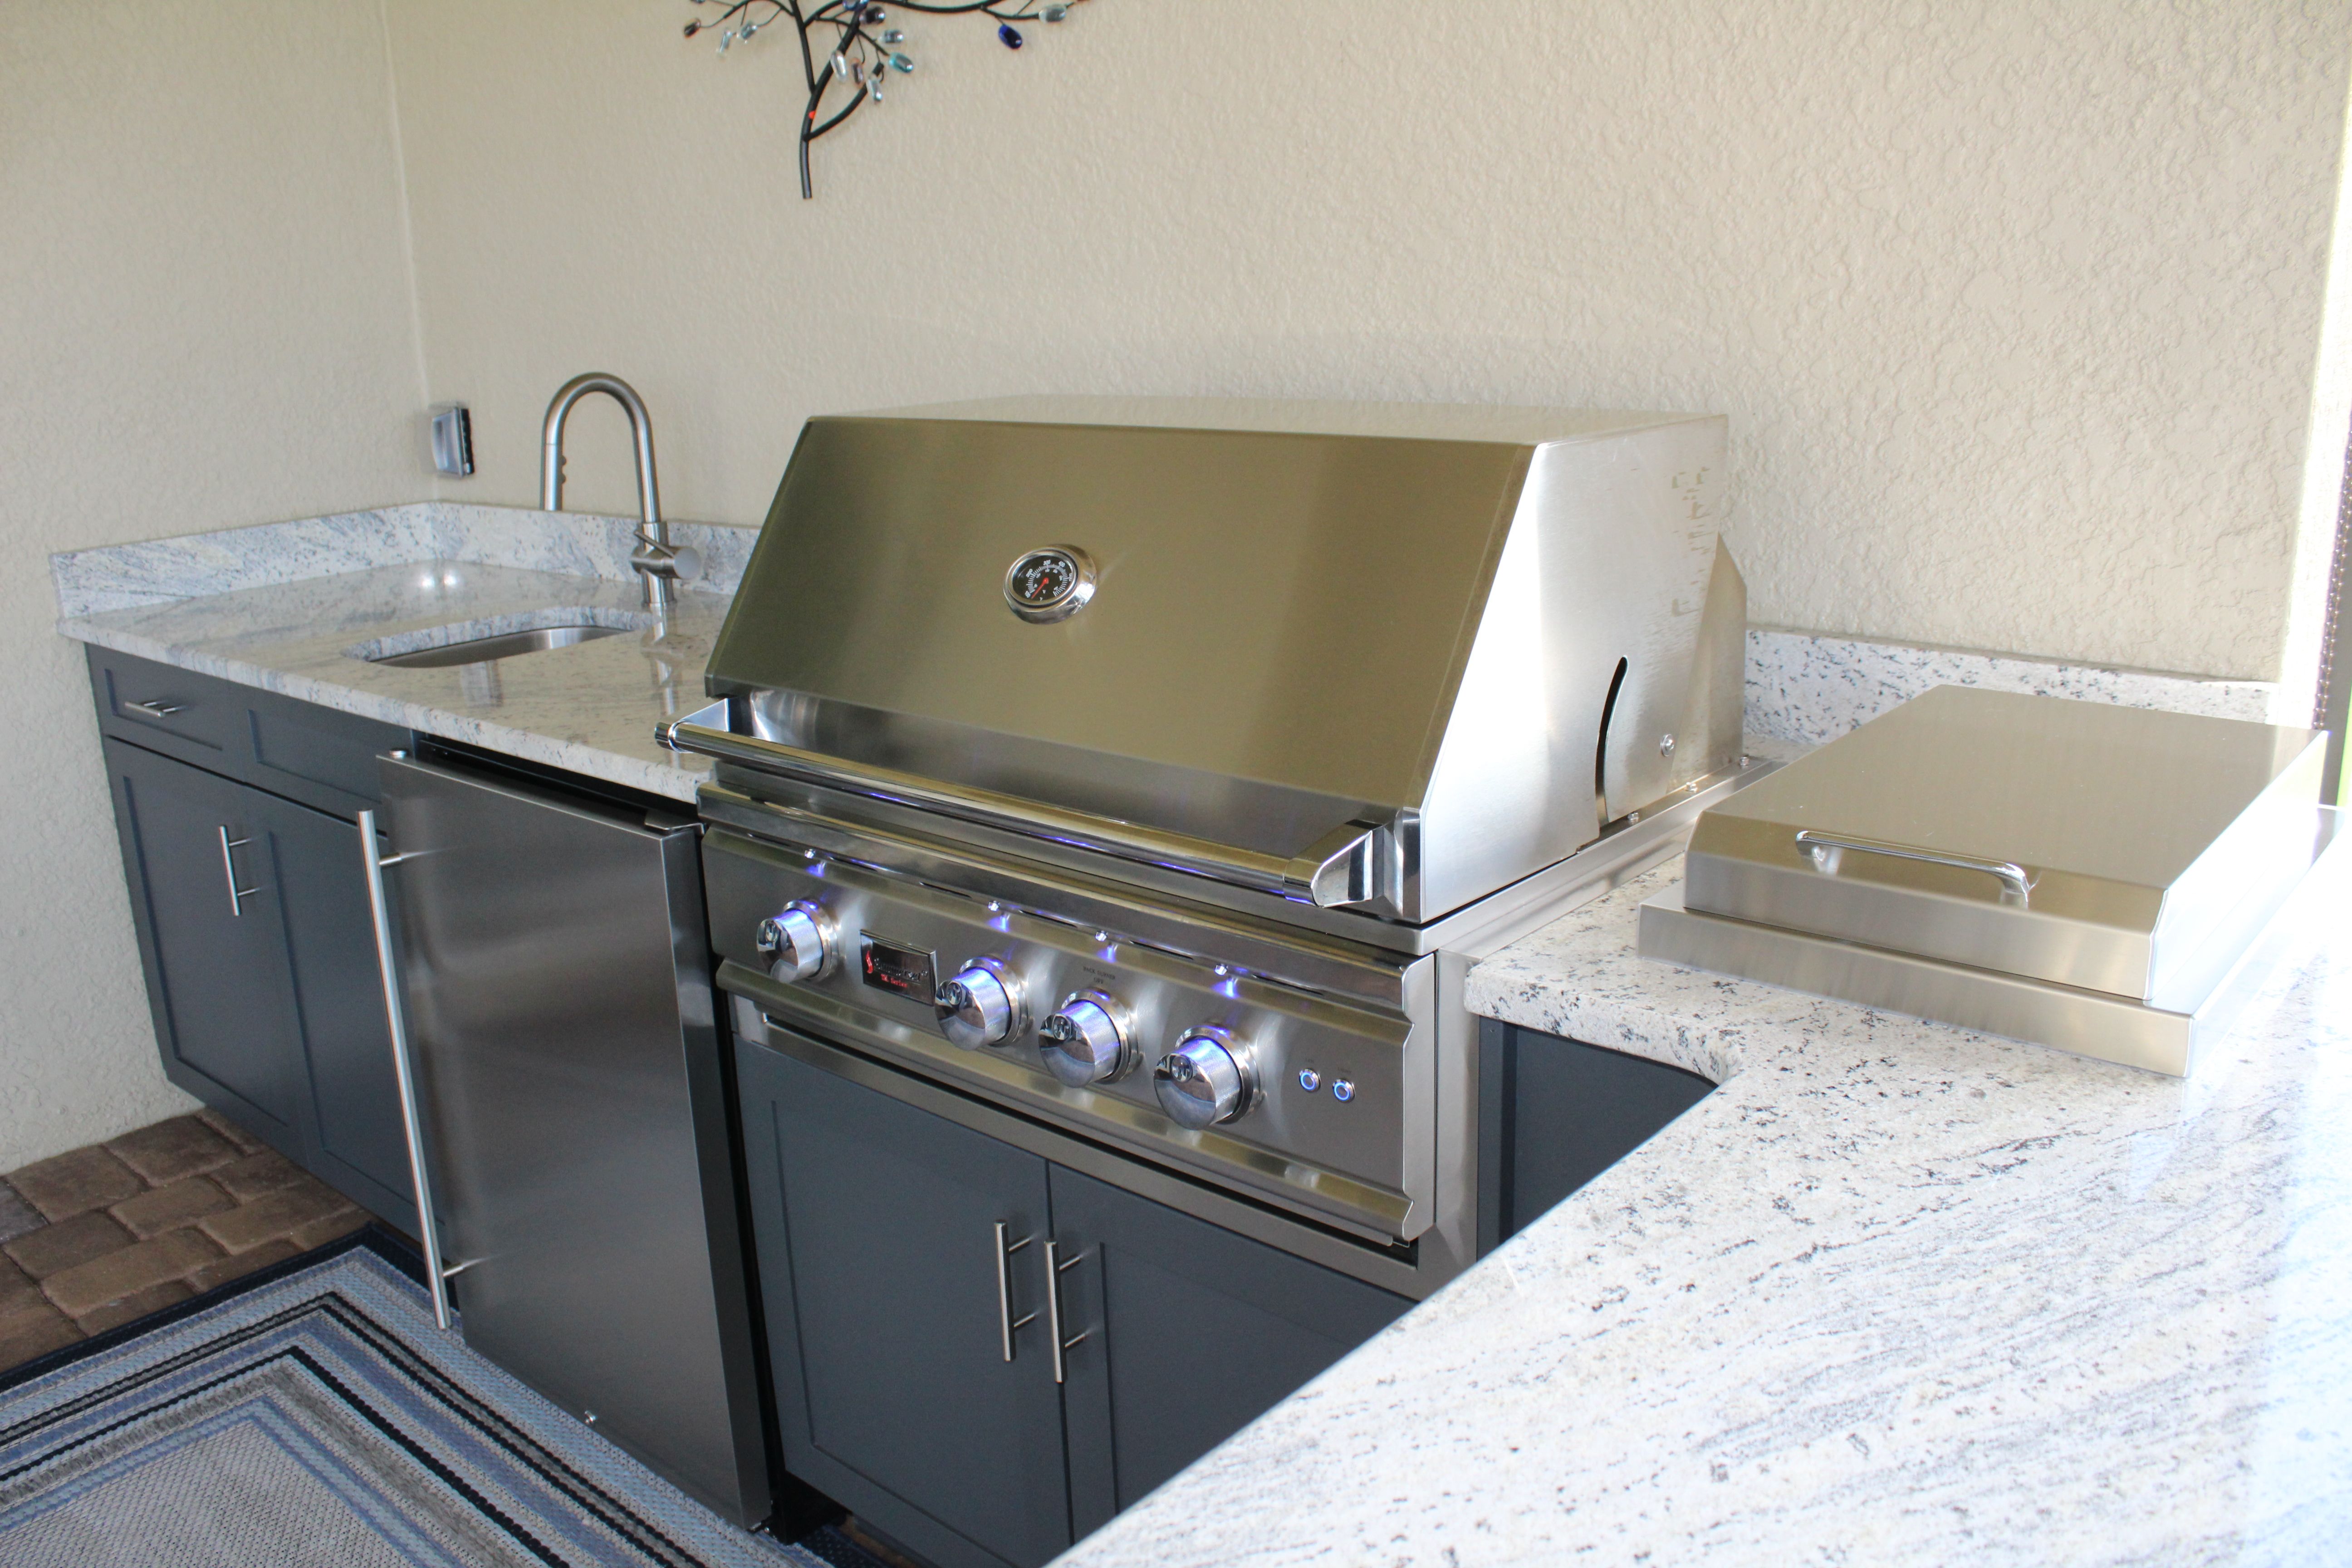 Caring for Your Outdoor Kitchen’s Countertops